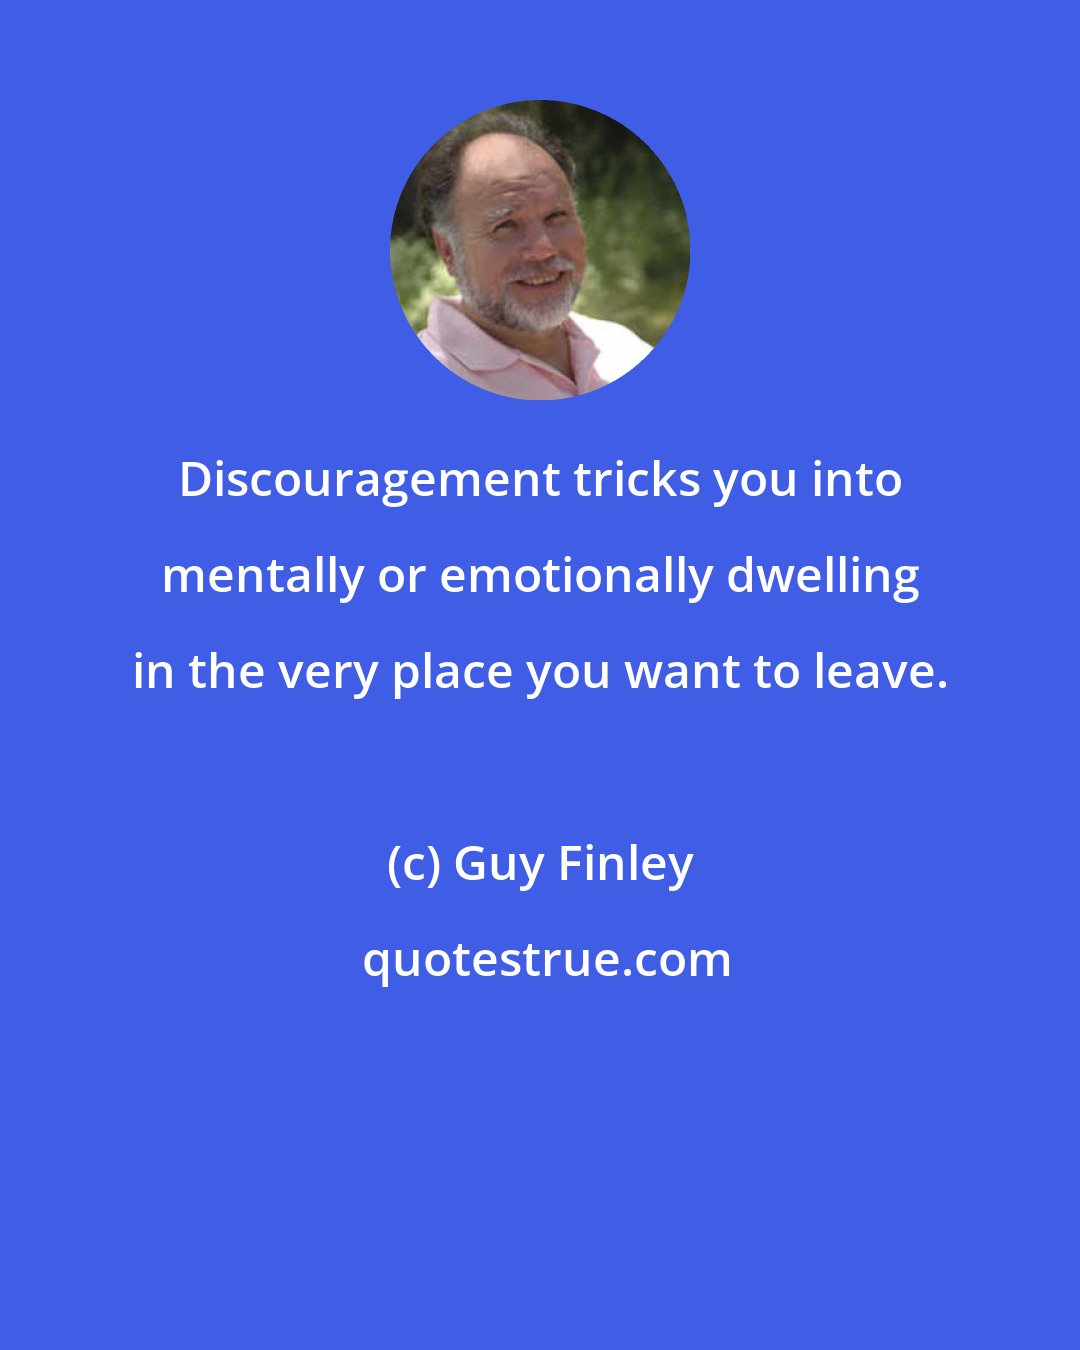 Guy Finley: Discouragement tricks you into mentally or emotionally dwelling in the very place you want to leave.